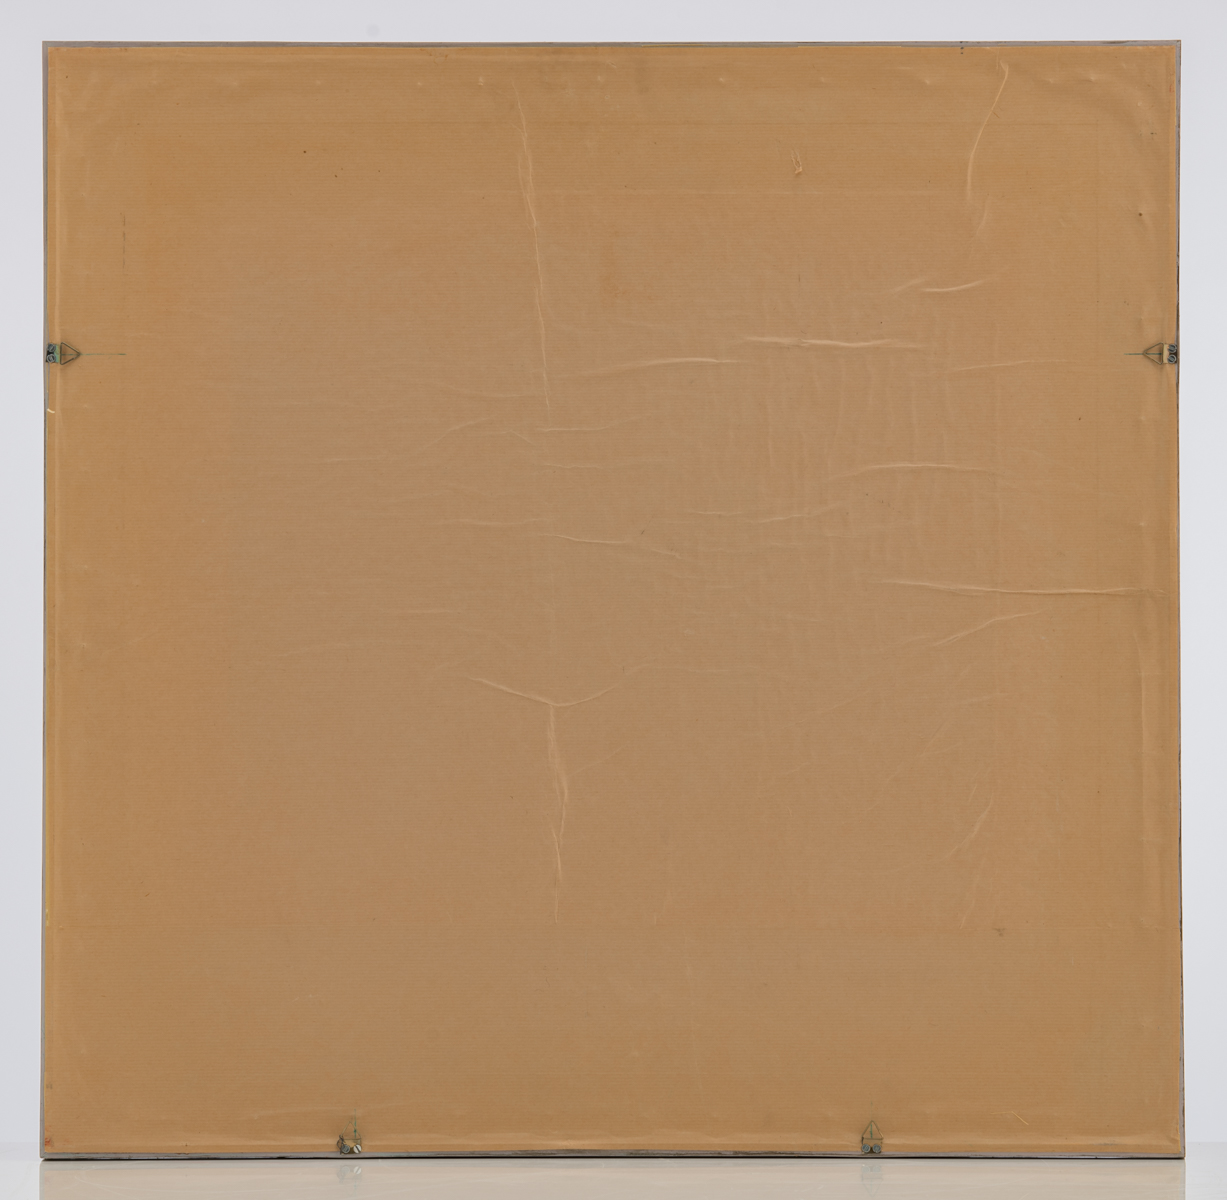 Swimberghe G., untitled, dated 1972, silk screen, 50/50, 44,5 x 49,5 cm; added Hoffmann J., untitled - Image 4 of 11